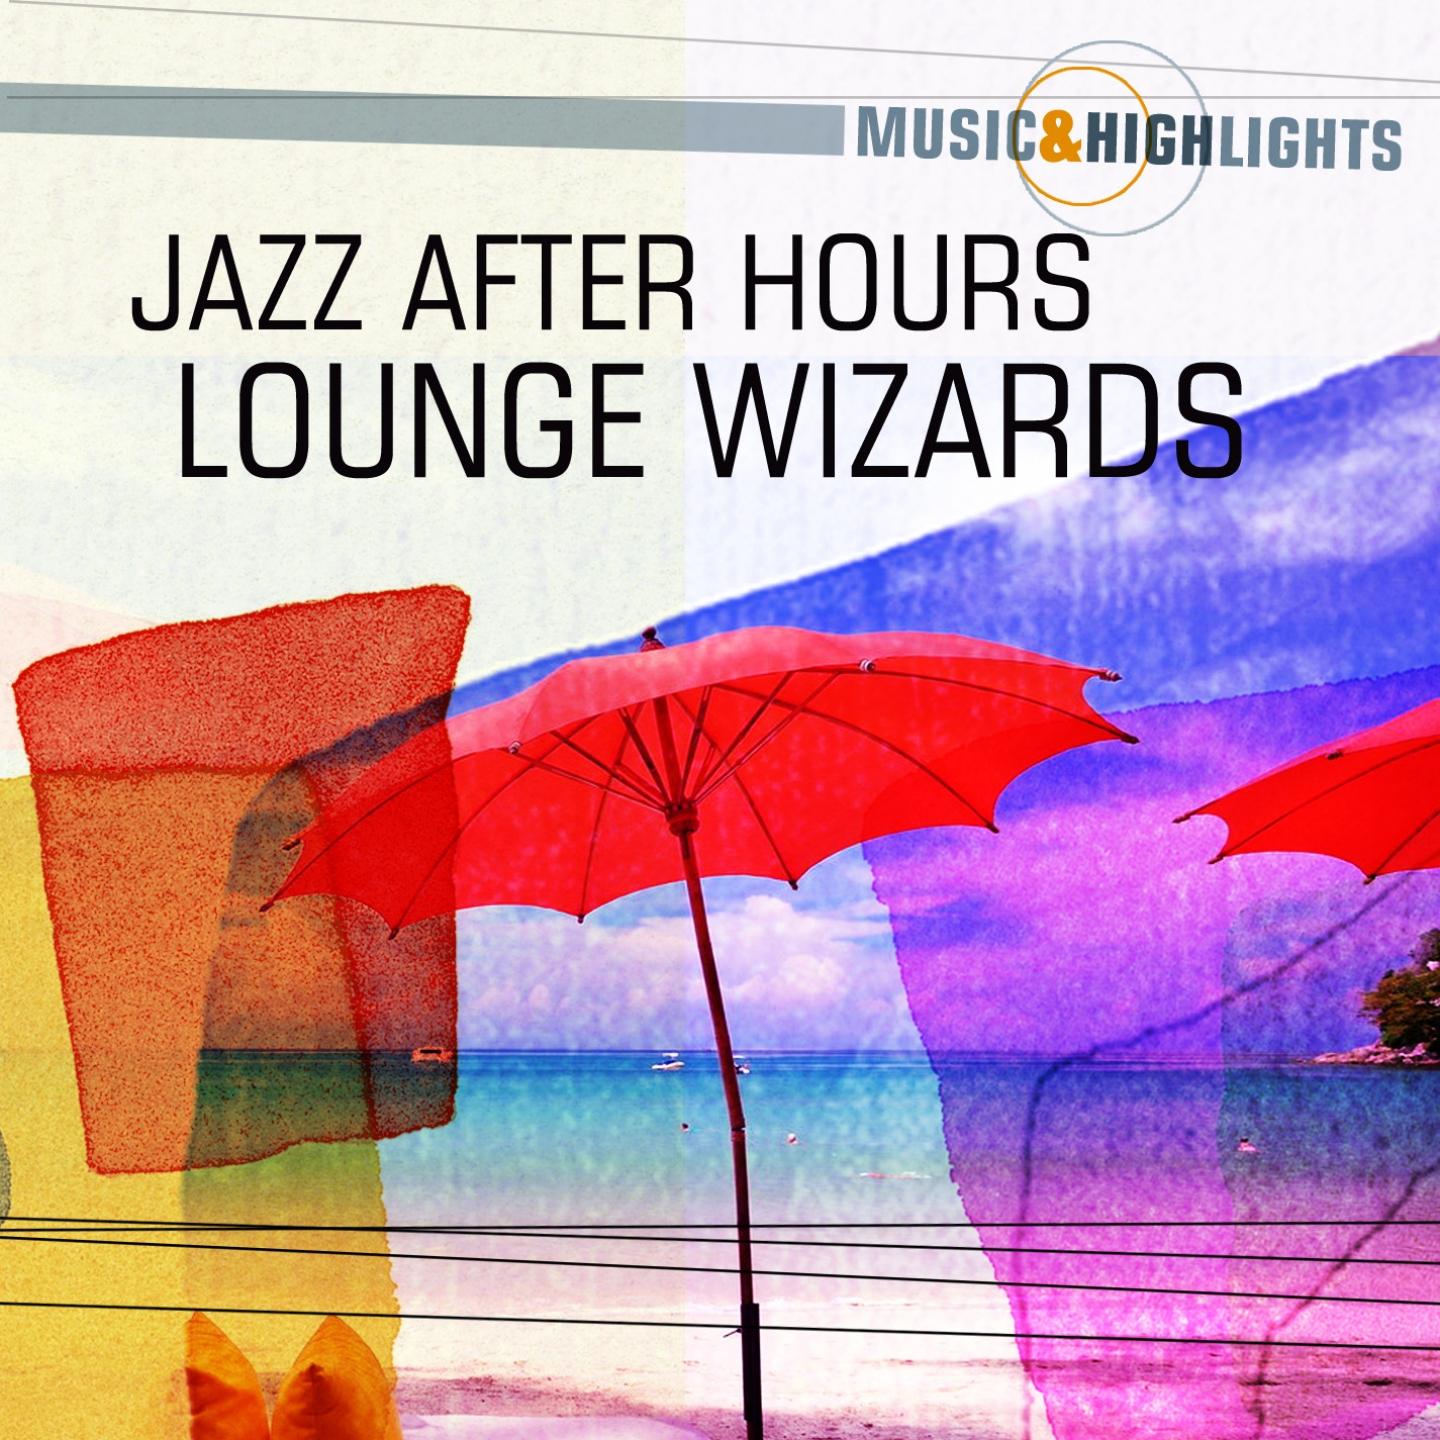 Music & Highlights: Jazz After Hours - Lounge Wizards